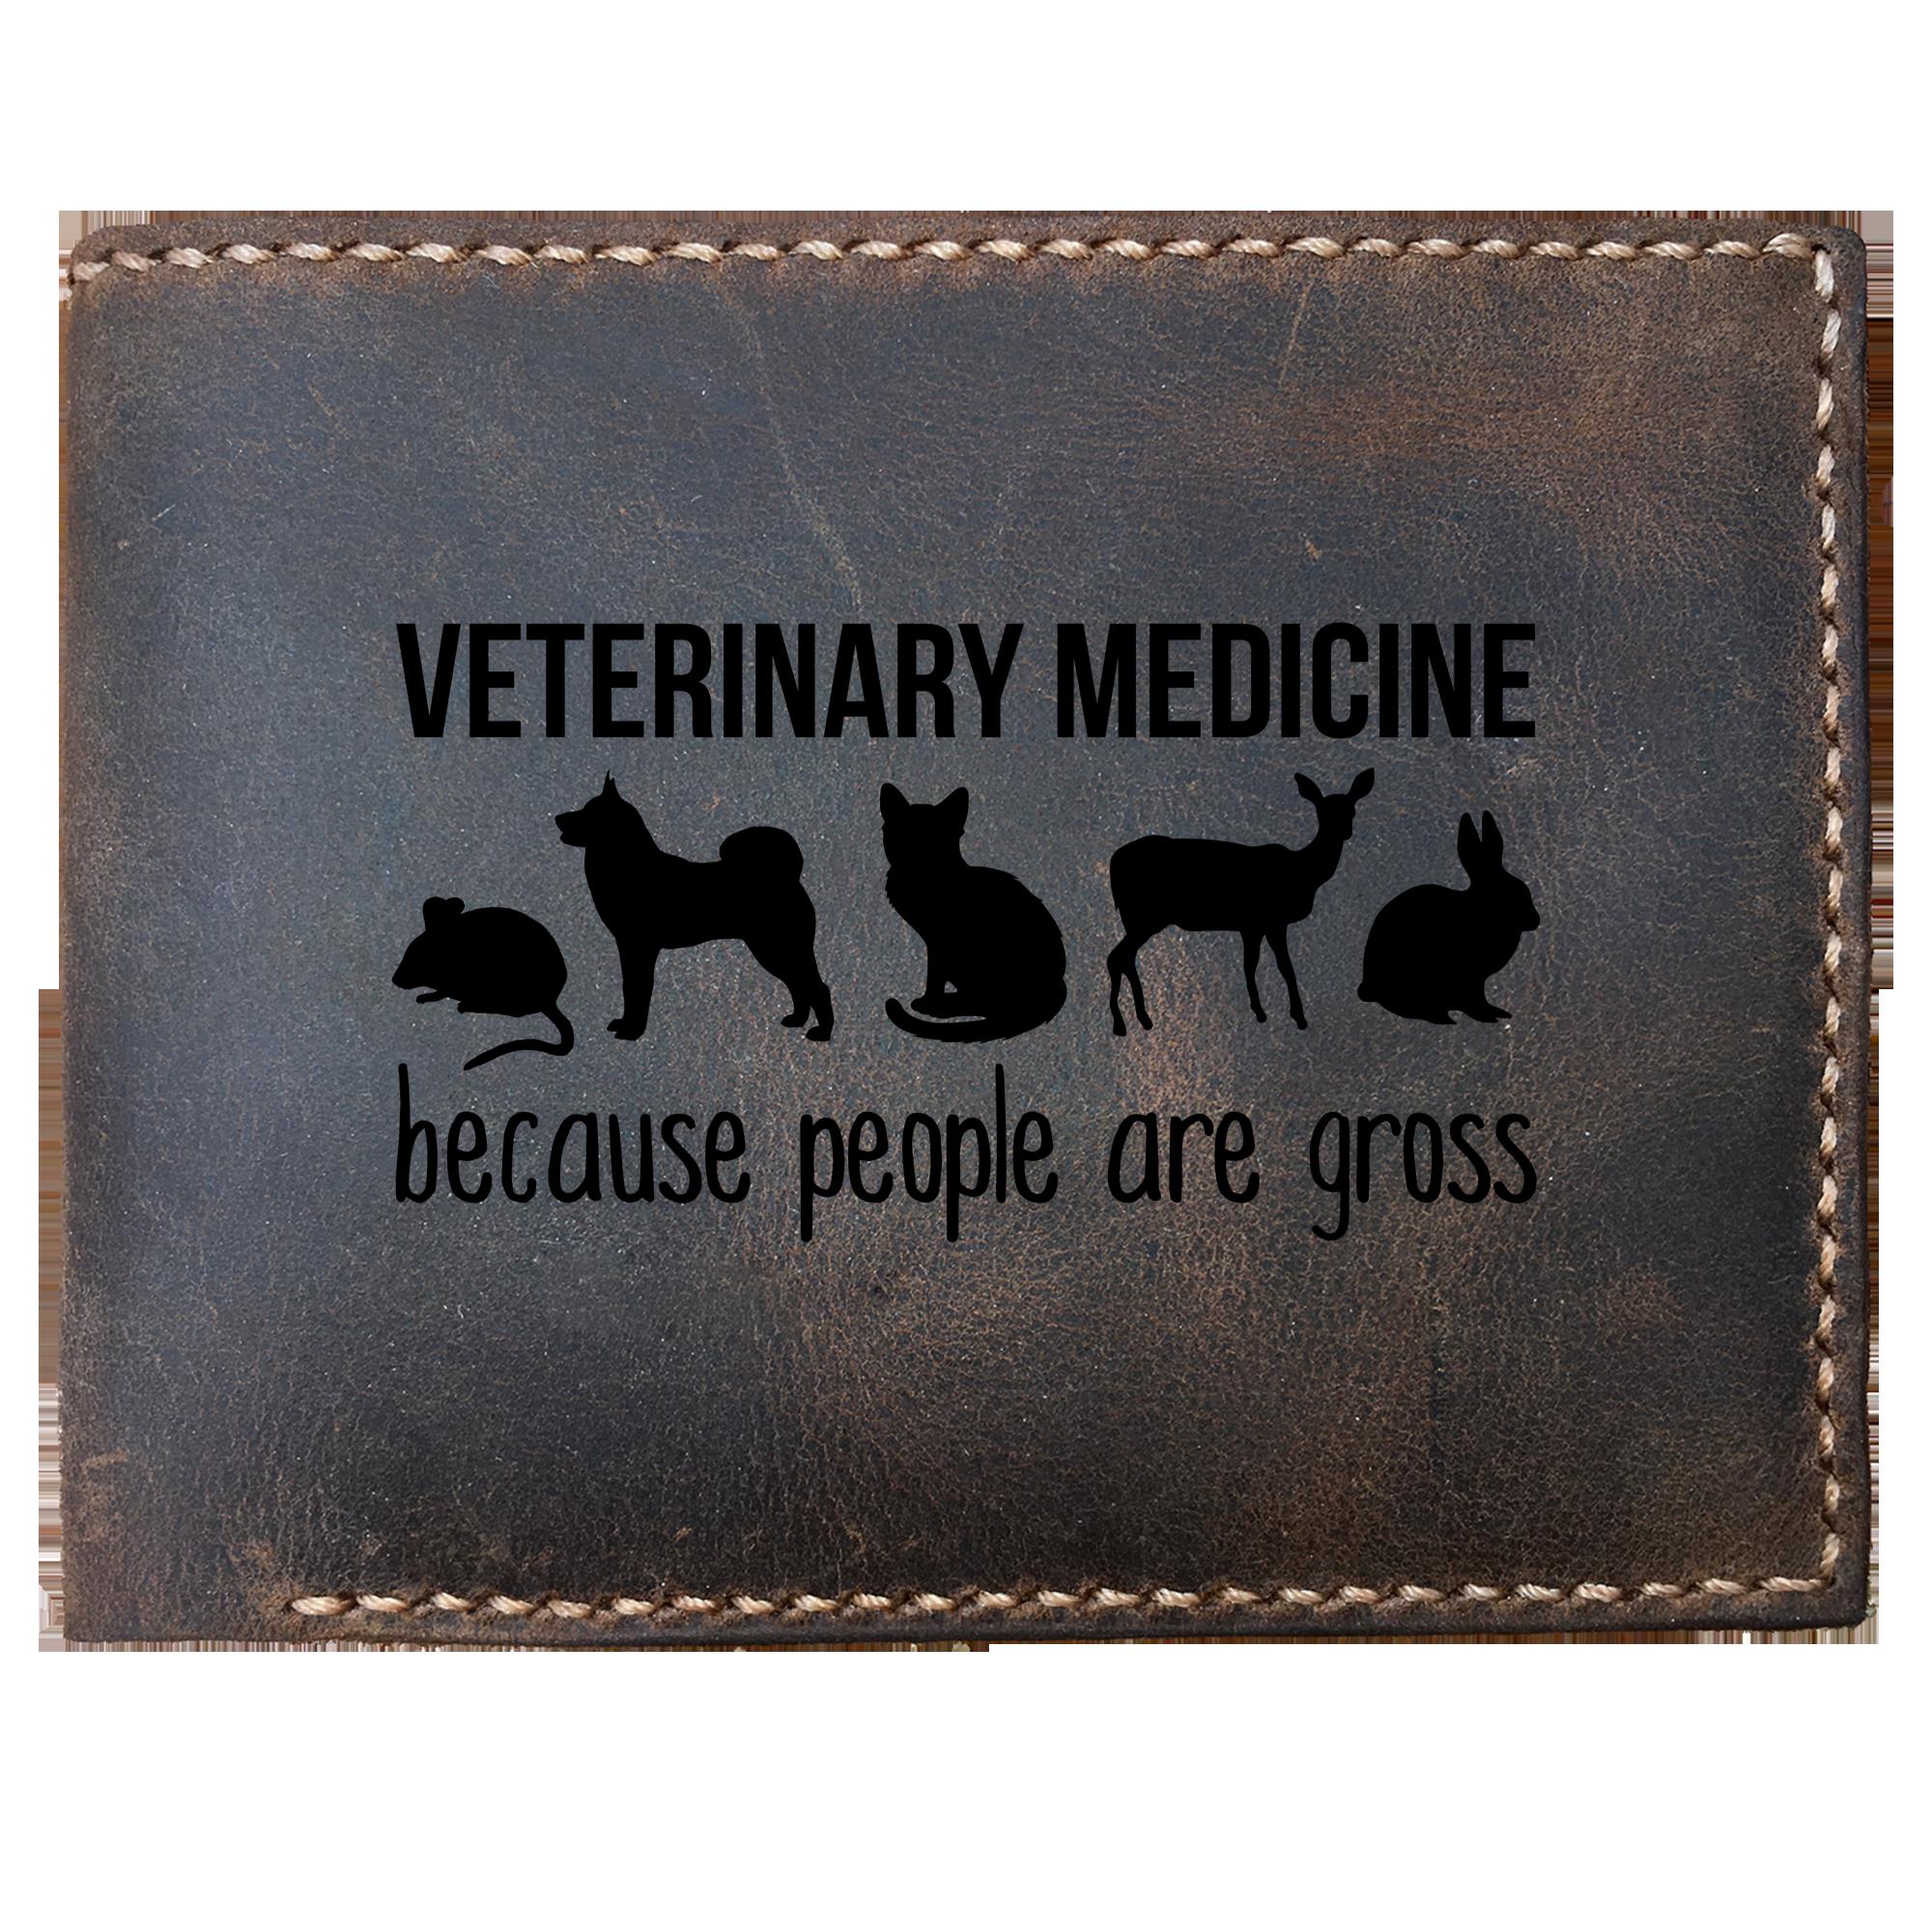 Skitongifts Funny Custom Laser Engraved Bifold Leather Wallet For Men, Veterinarian Medicine Because People Are Gross,Vet Nurse